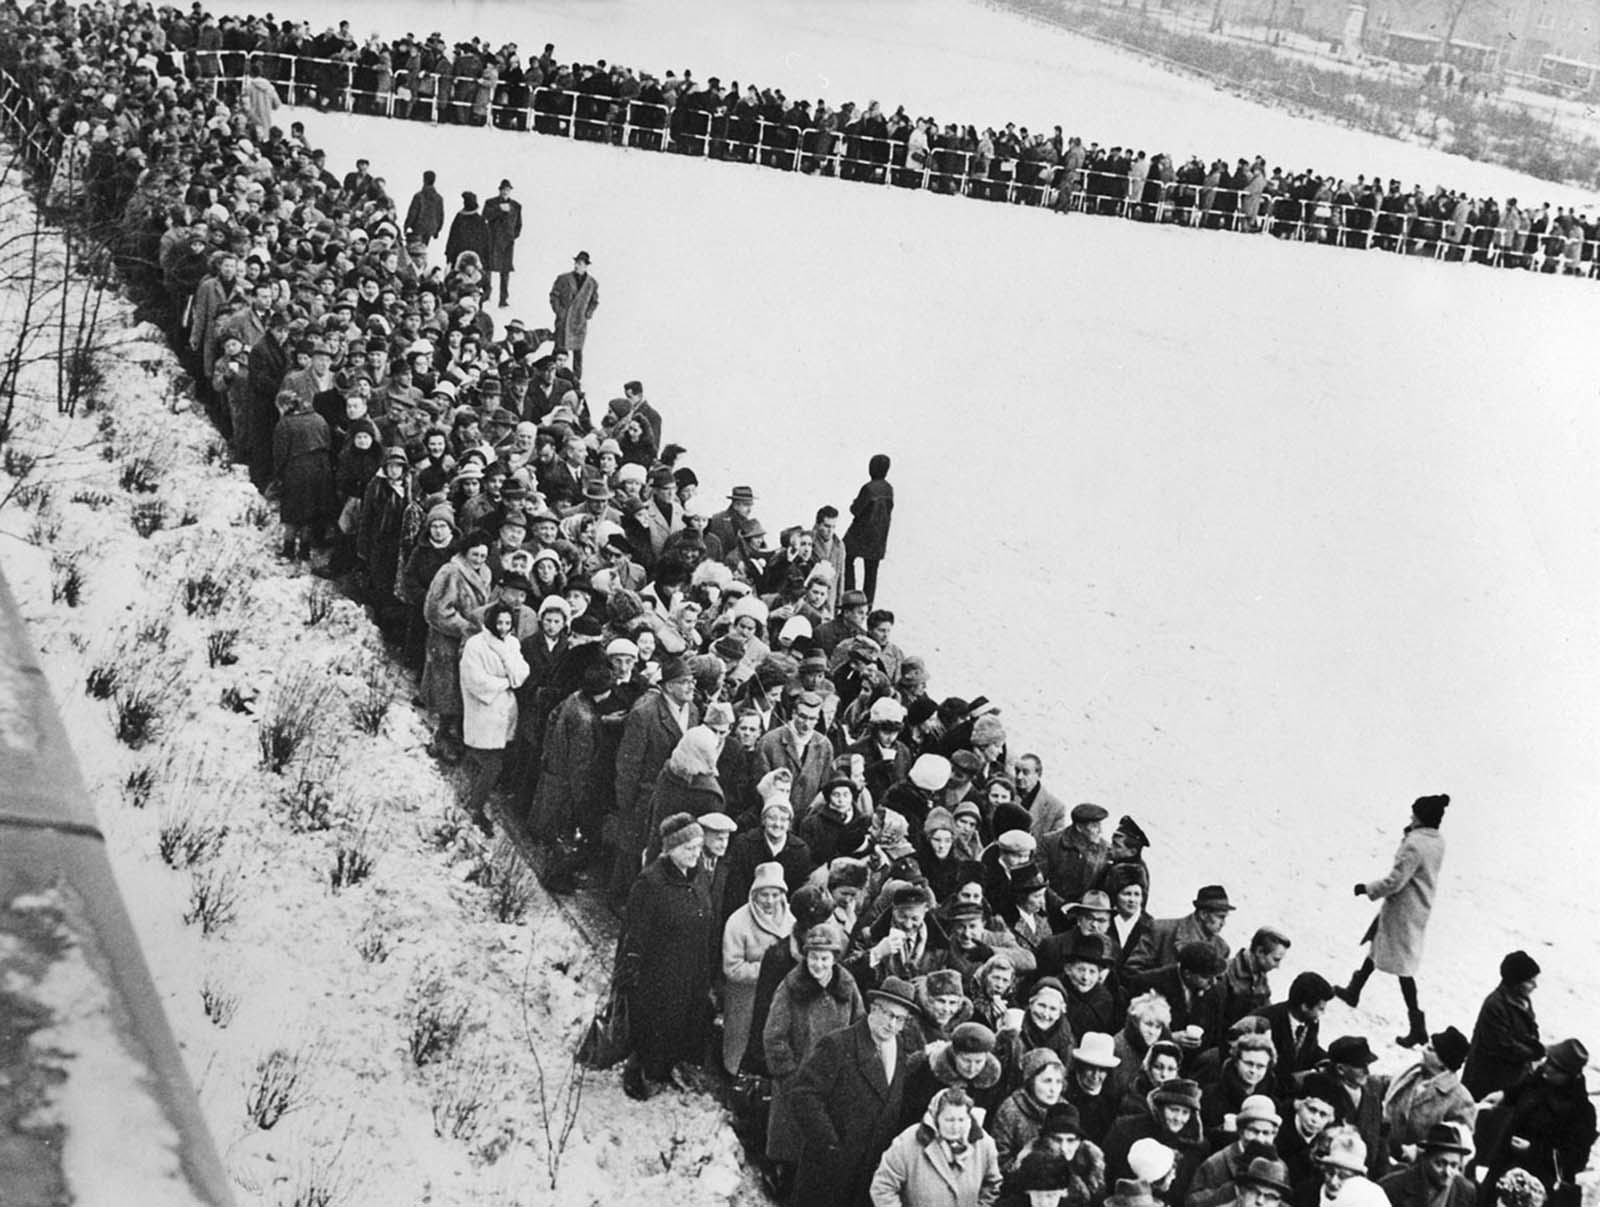 Thousands of people line up at the Schillerstrasse in Charlottenburg, Berlin, to apply for a passage slip to get across the border on December 19, 1963.